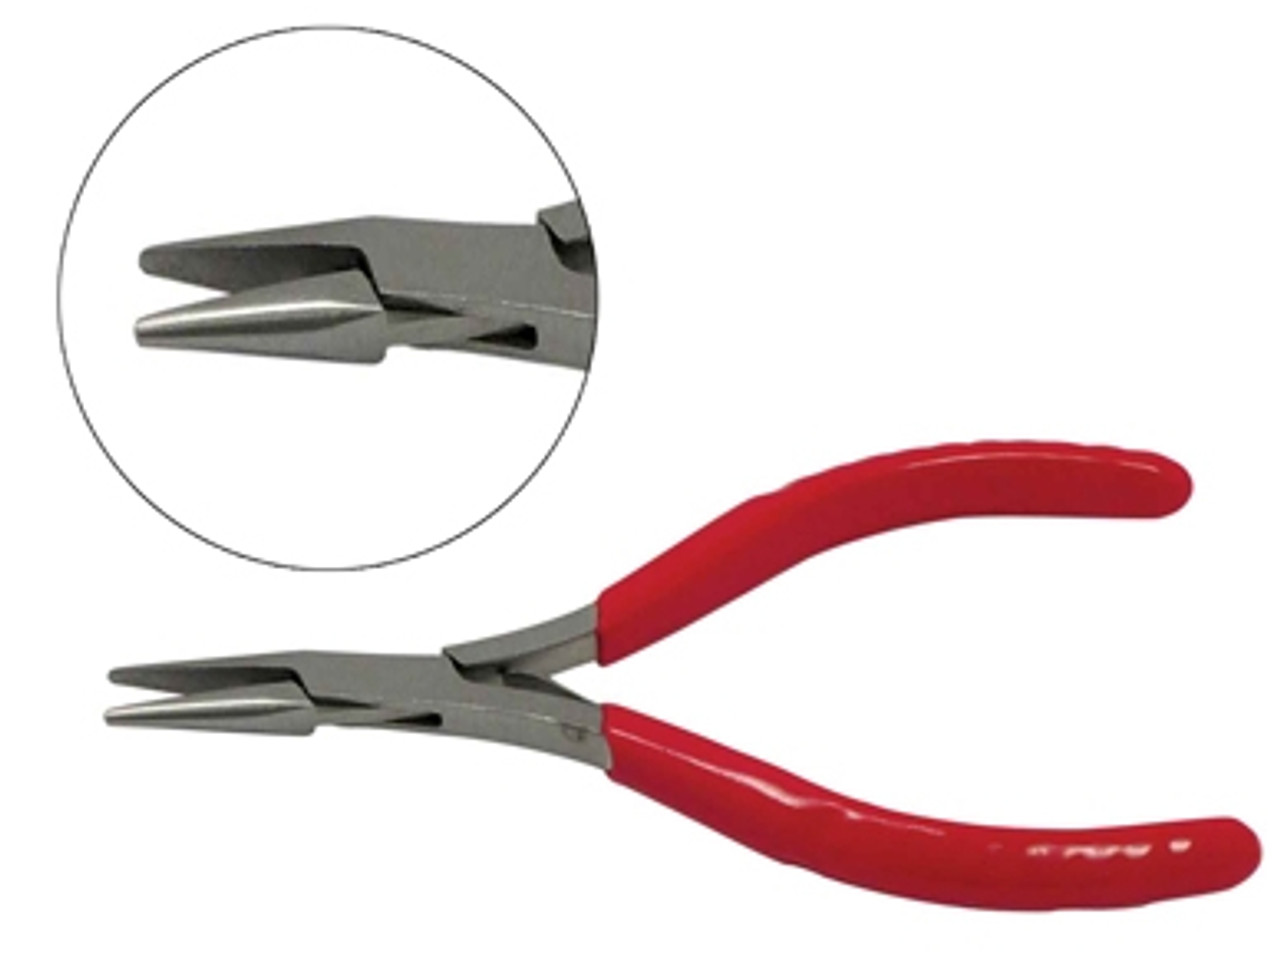 Stainless Steel Needle Nose Plier